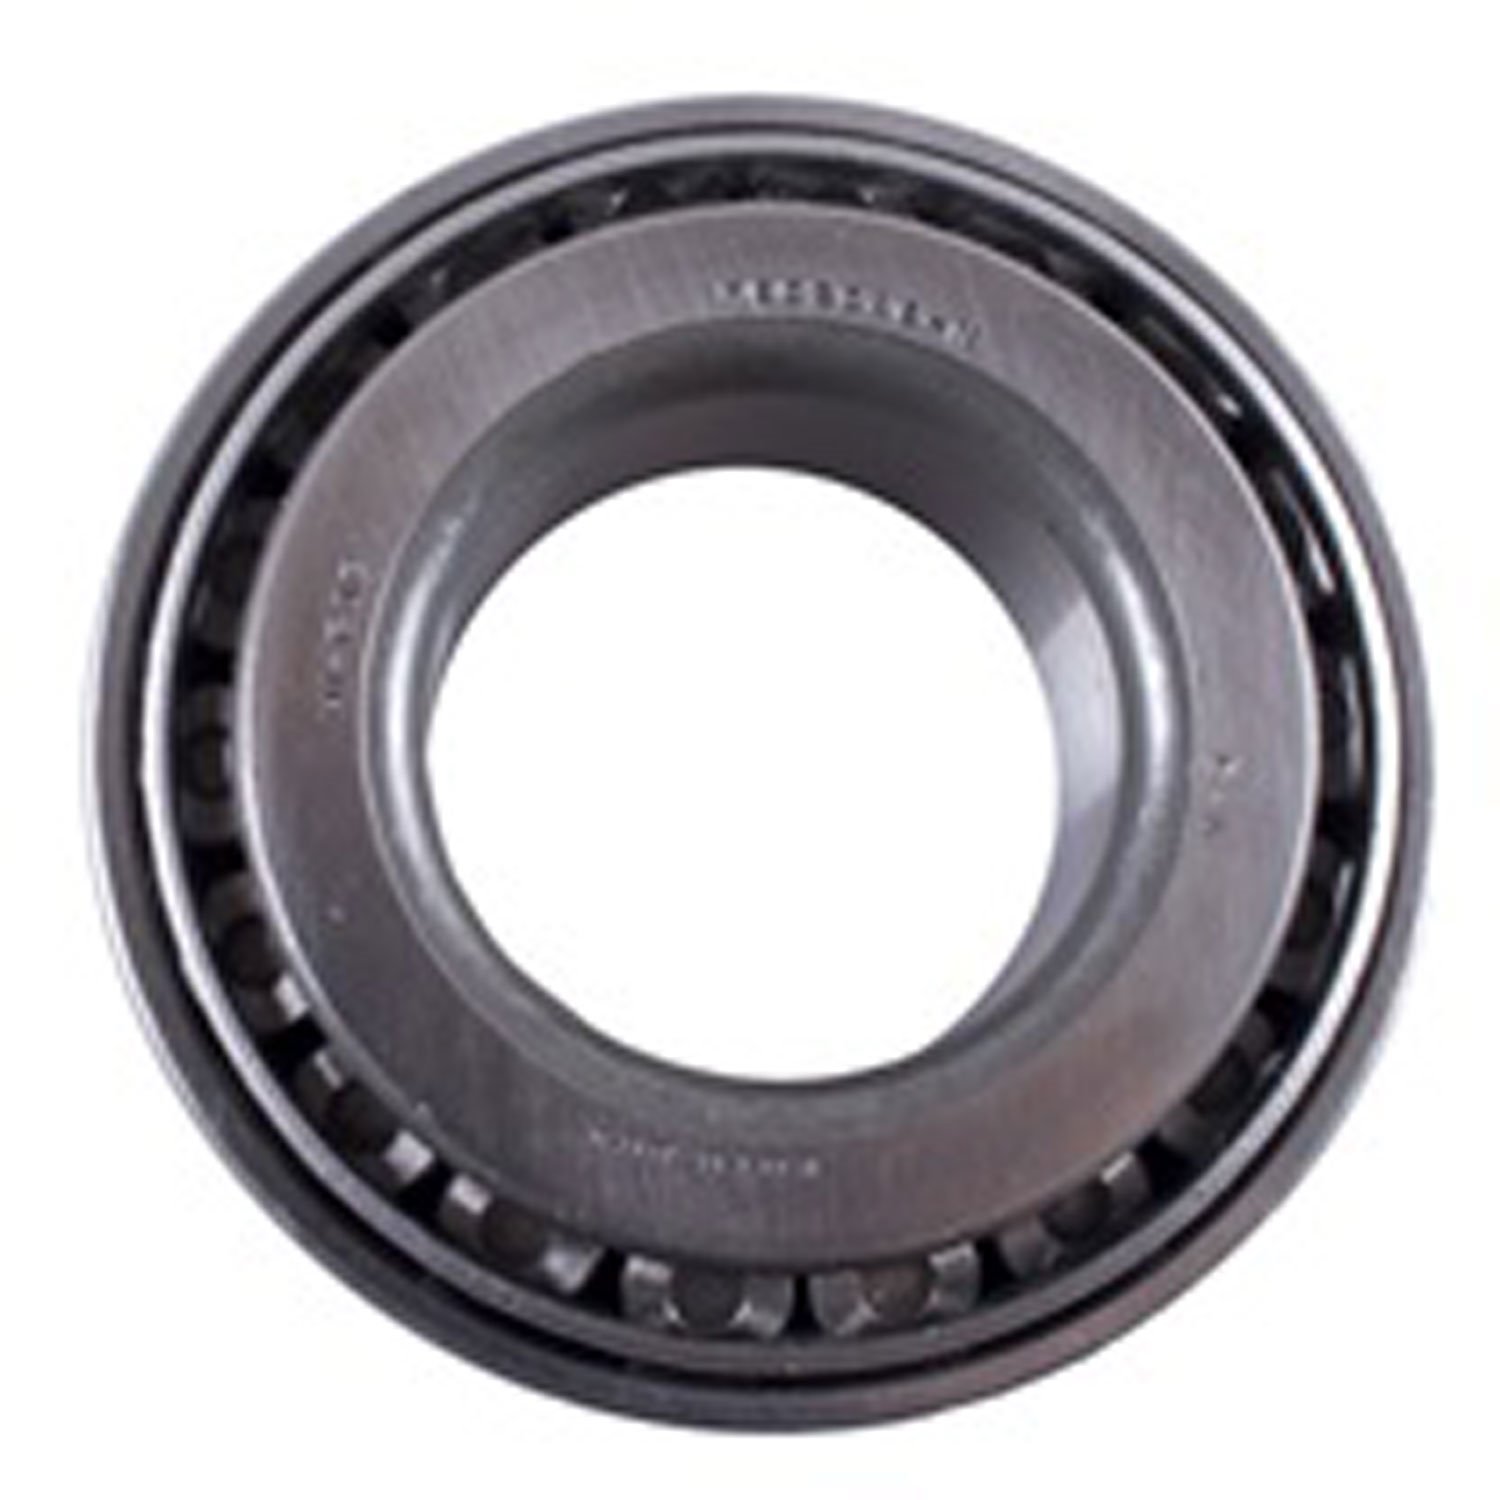 This inner pinion bearing from Omix-ADA for Dana 30/35/44 found in 02-09 Jeep Libertys and 07-10 Wranglers.